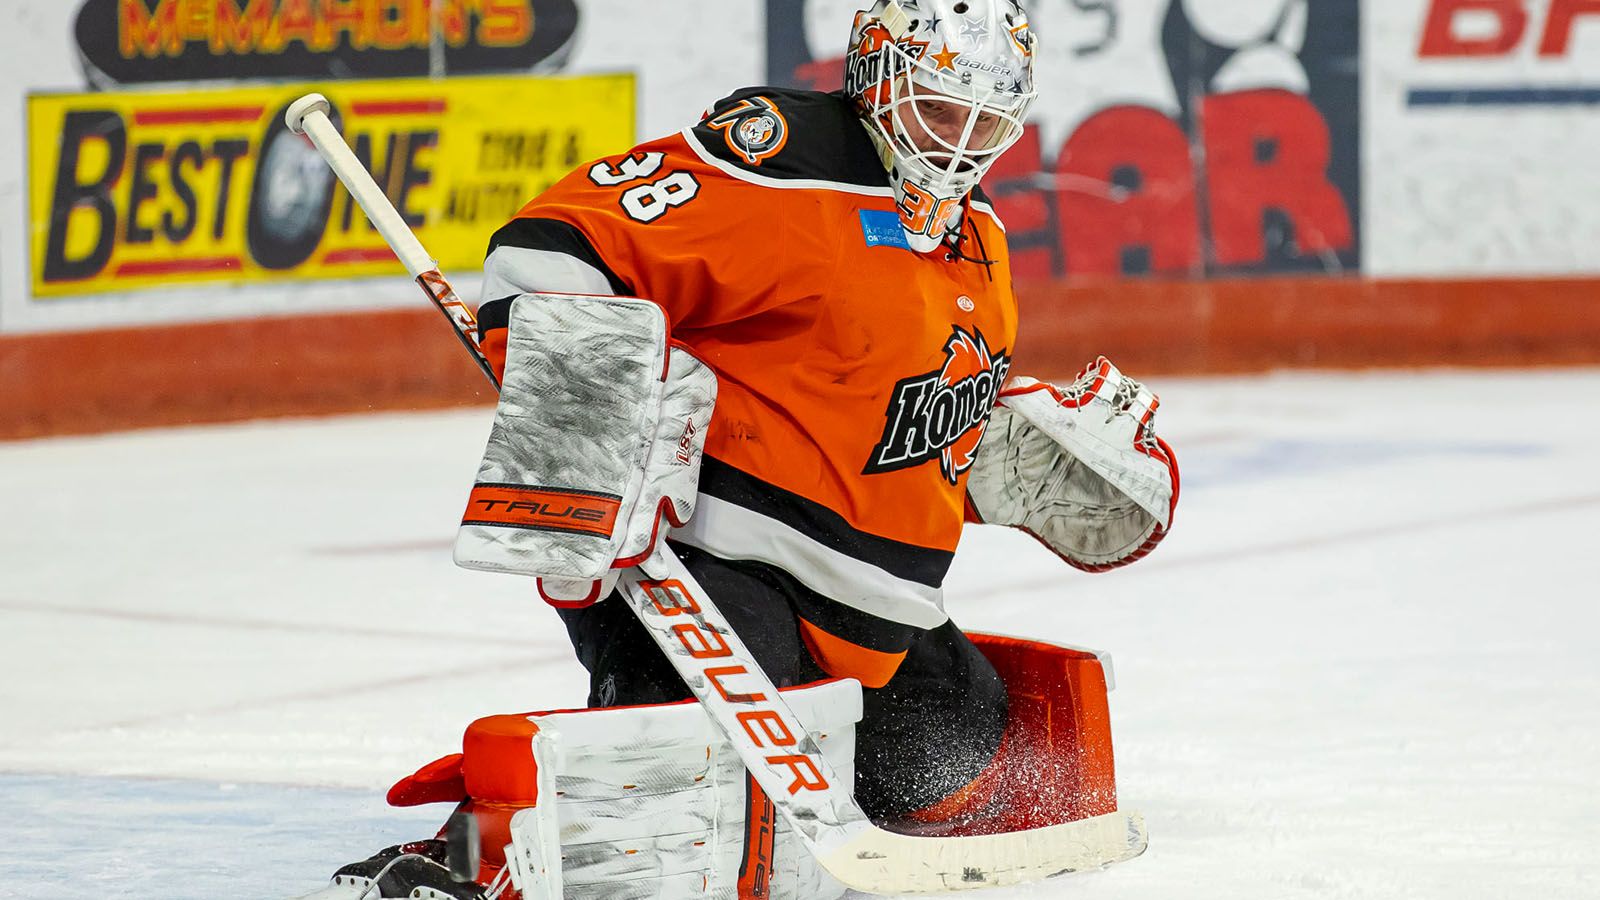 The Komets face Toledo in their annual New Year's Eve game.